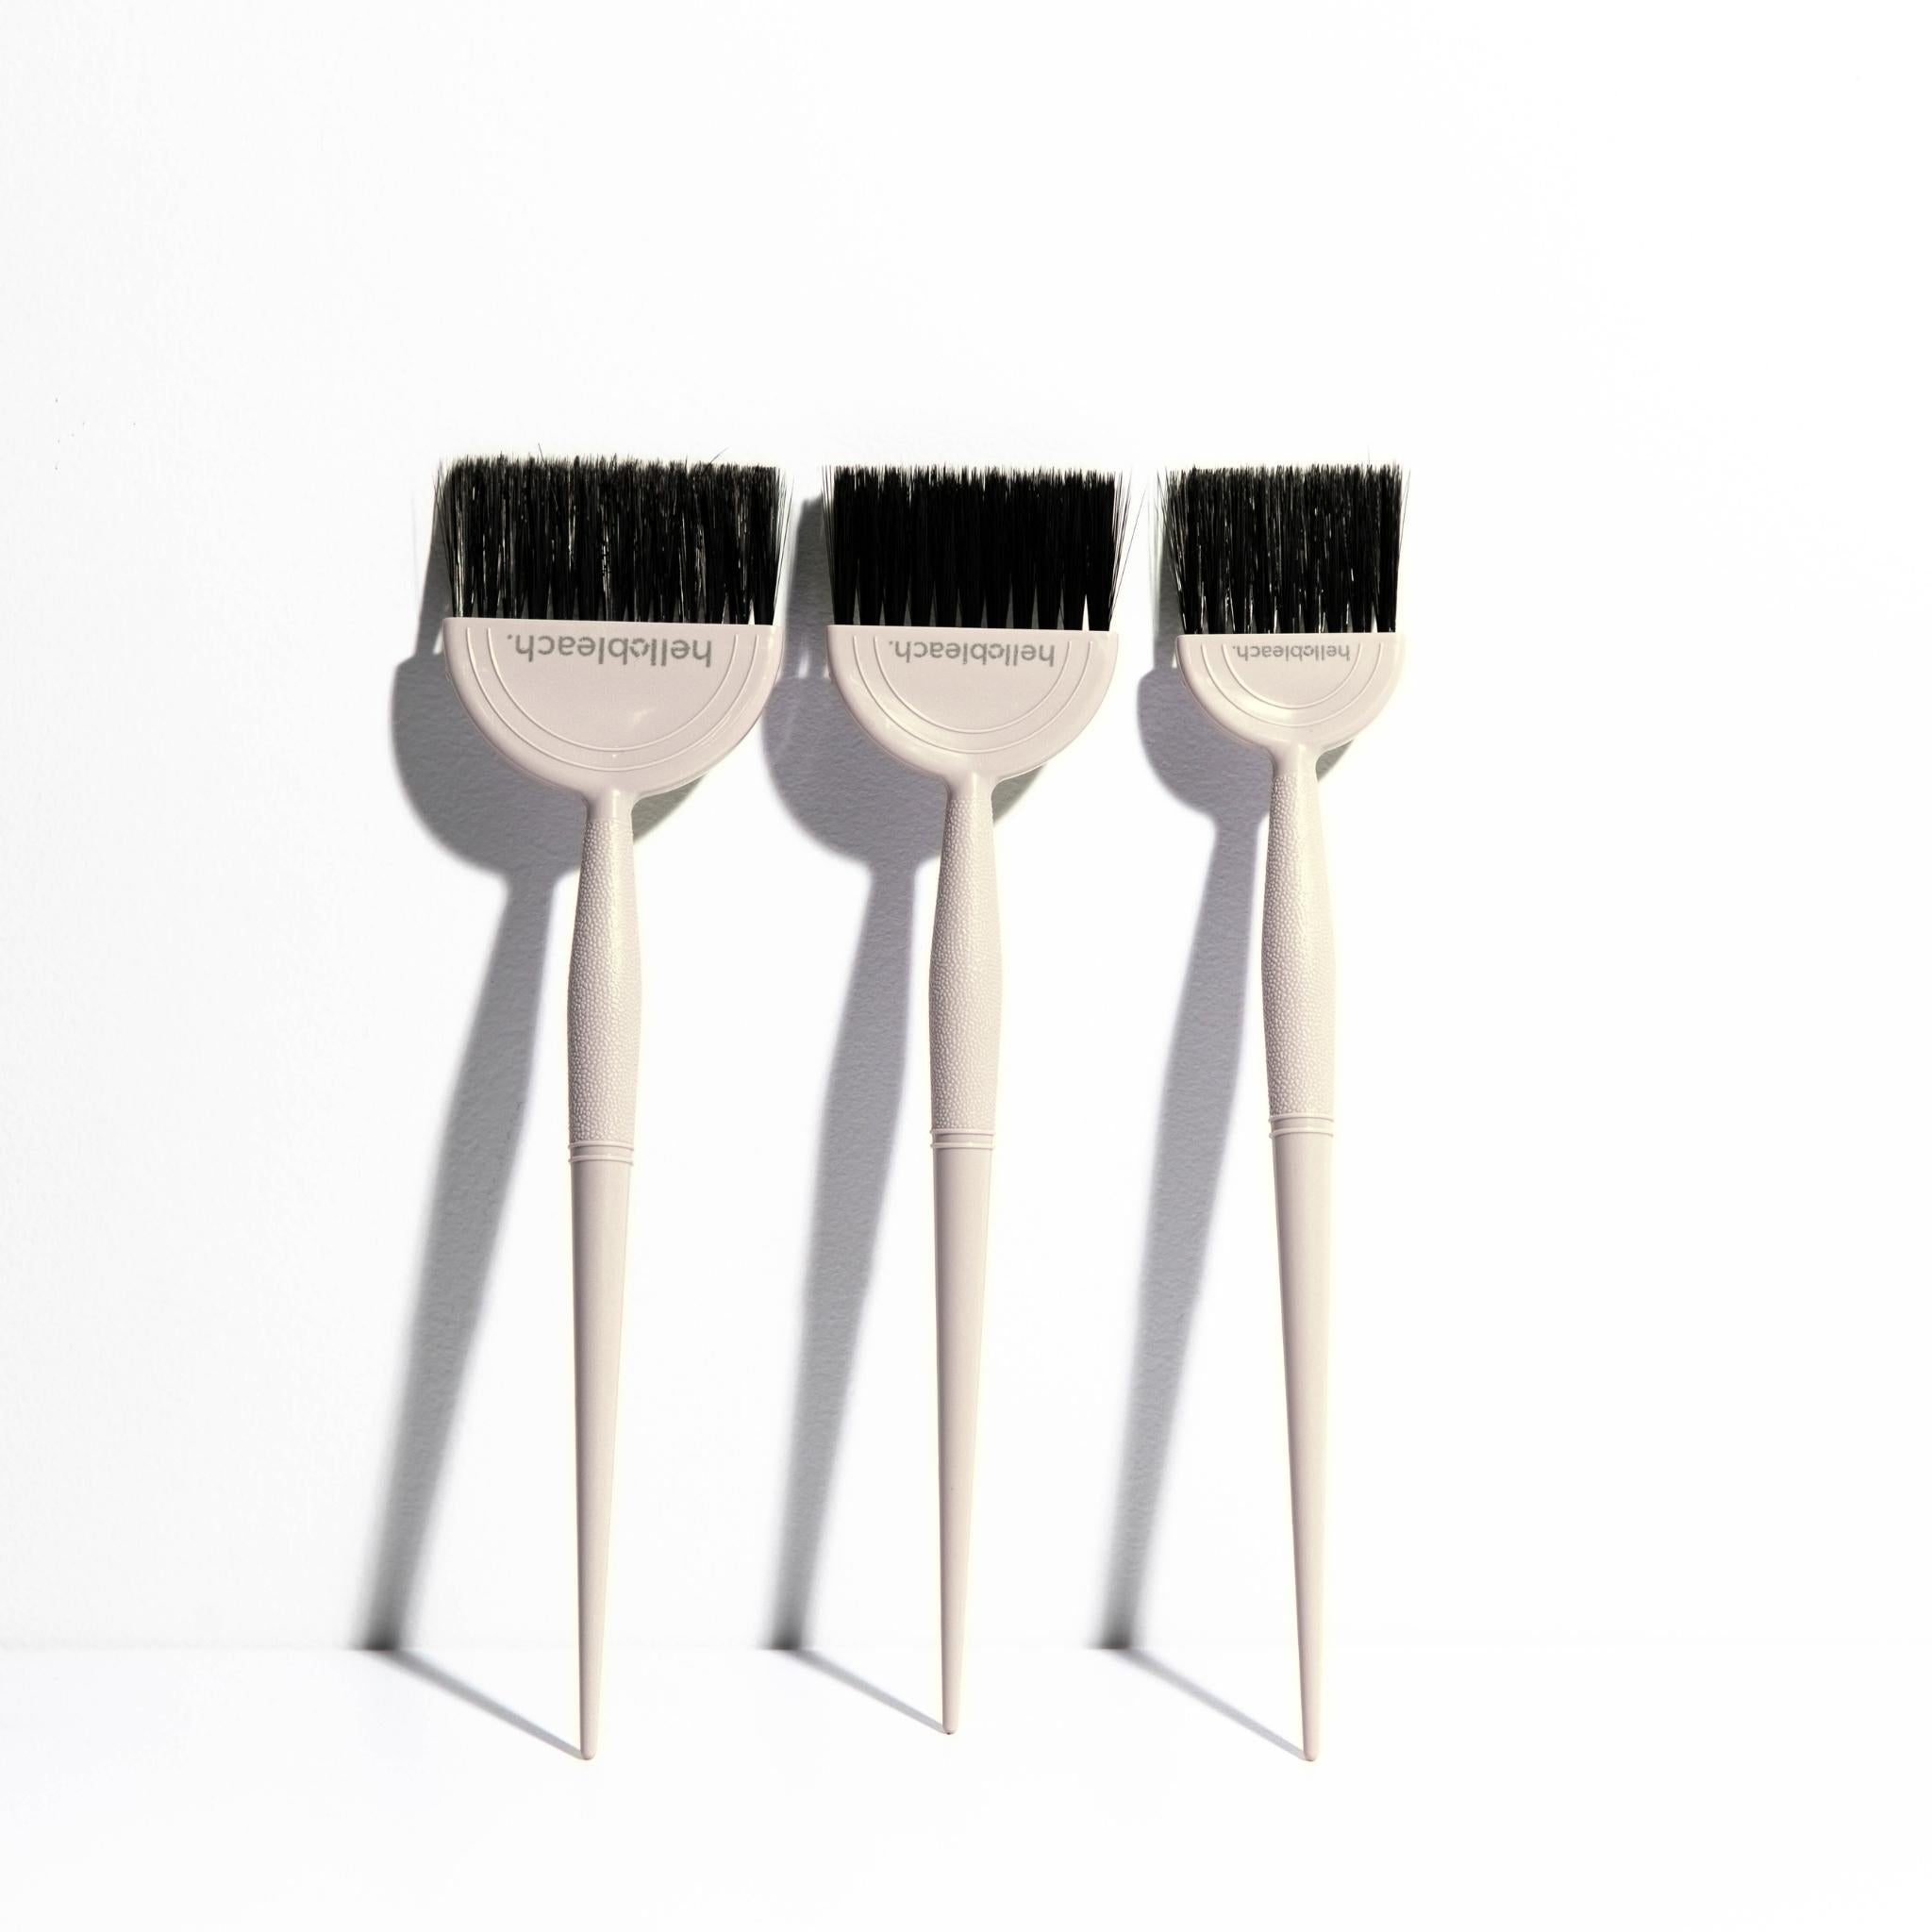 TINT BRUSHES MADE FROM RECYCLED PLASTICS